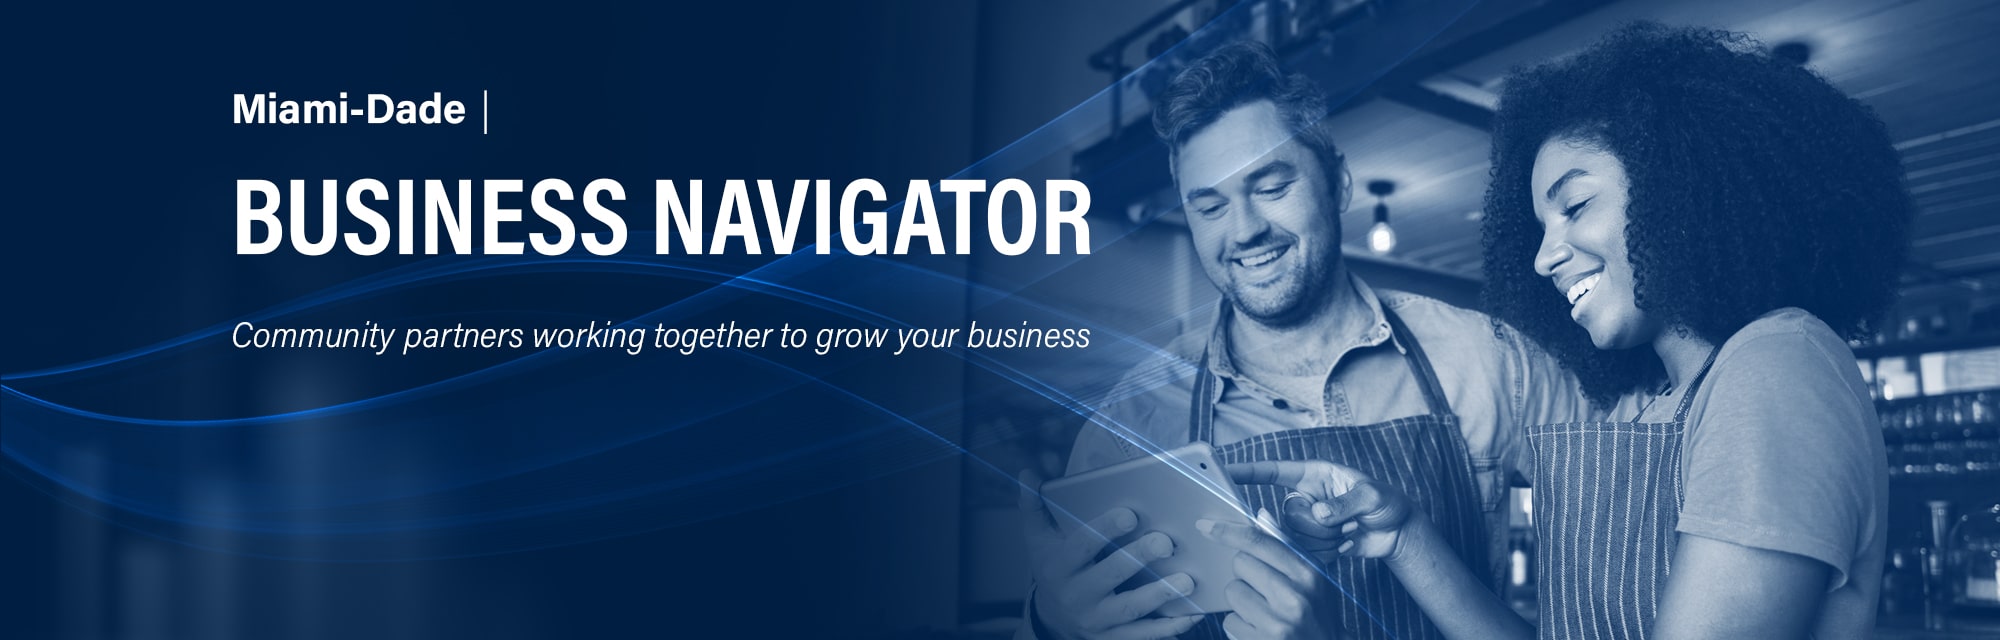 Miami-Dade Business Navigator, Community partners working together to grow your business